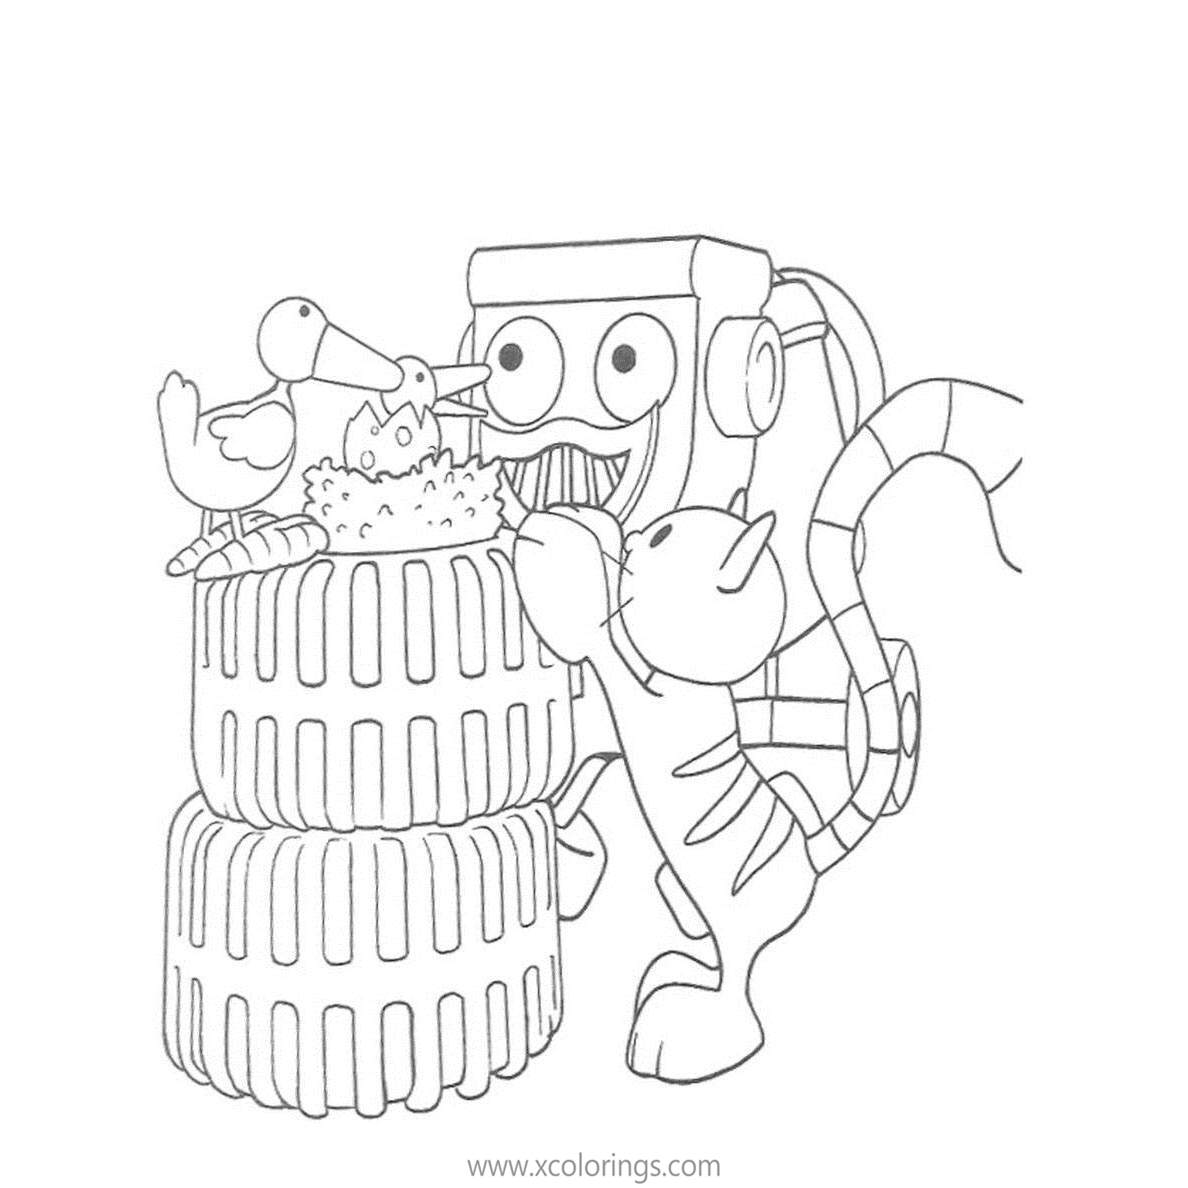 Free Bob The Builder Coloring Pages Dizzy Pilchard and Birds printable